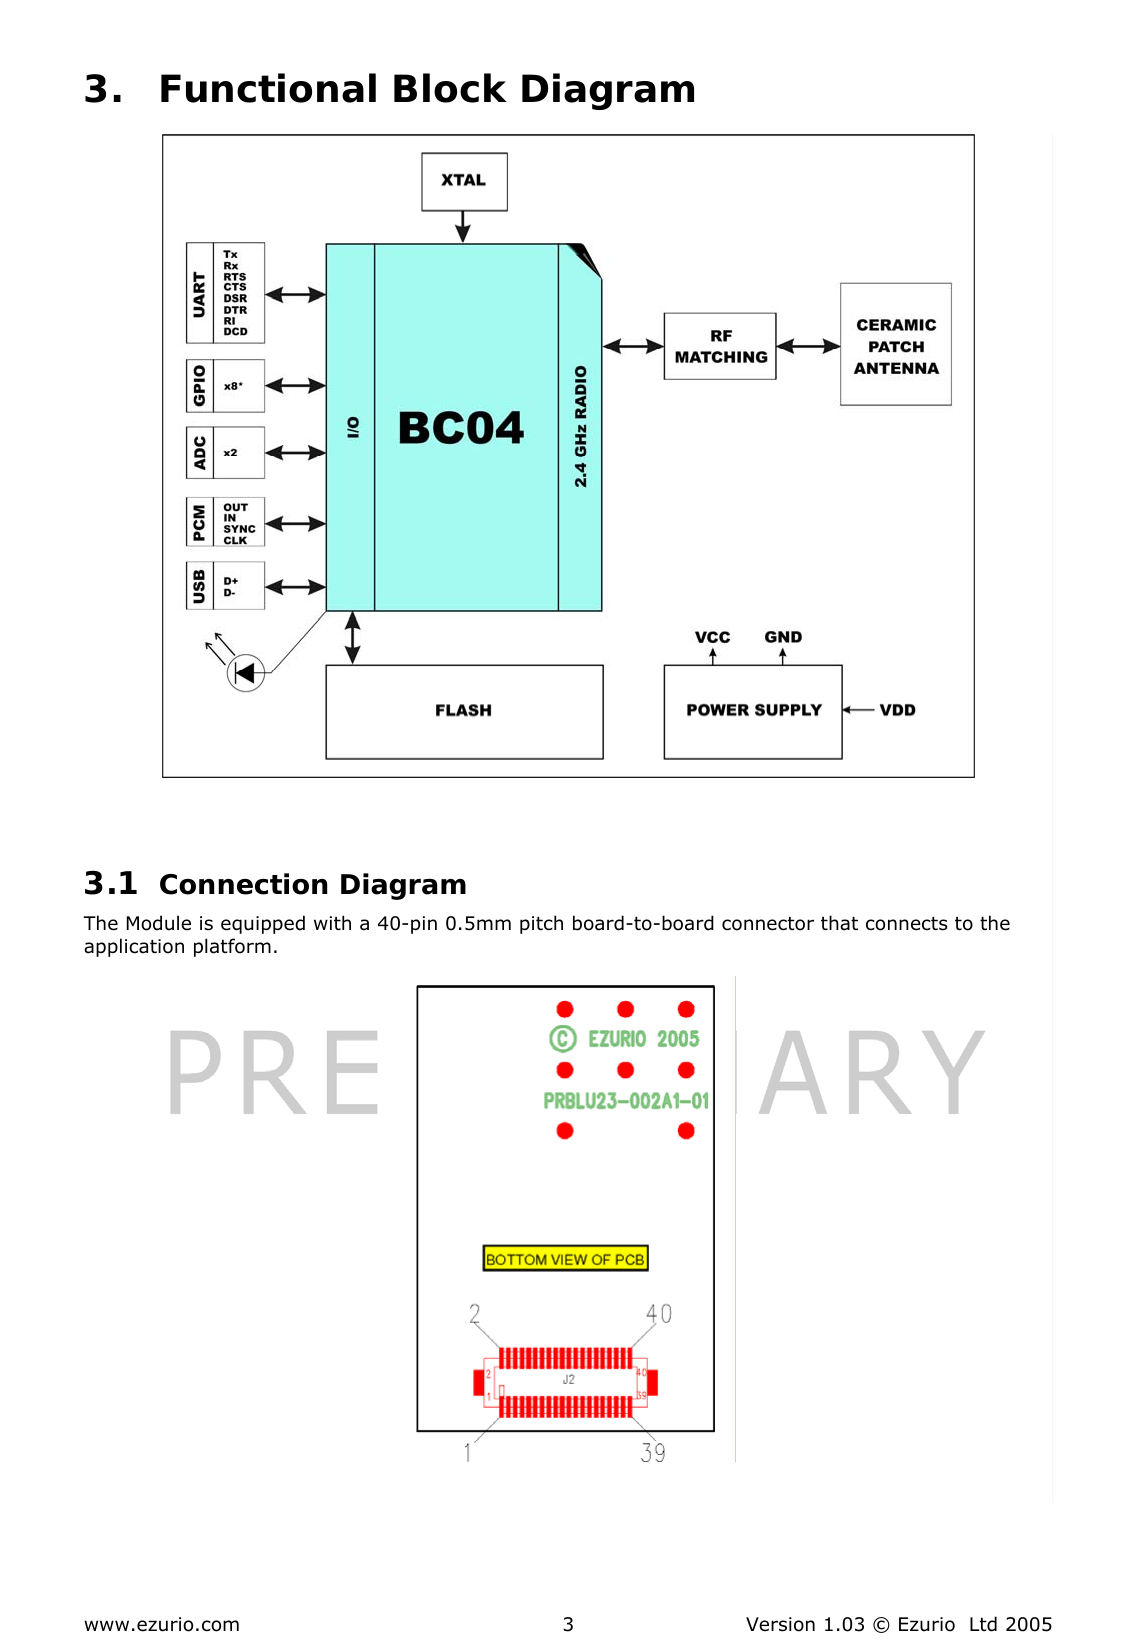  www.ezurio.com  Version 1.03 © Ezurio  Ltd 2005 33. Functional Block Diagram   3.1 Connection Diagram The Module is equipped with a 40-pin 0.5mm pitch board-to-board connector that connects to the application platform.    